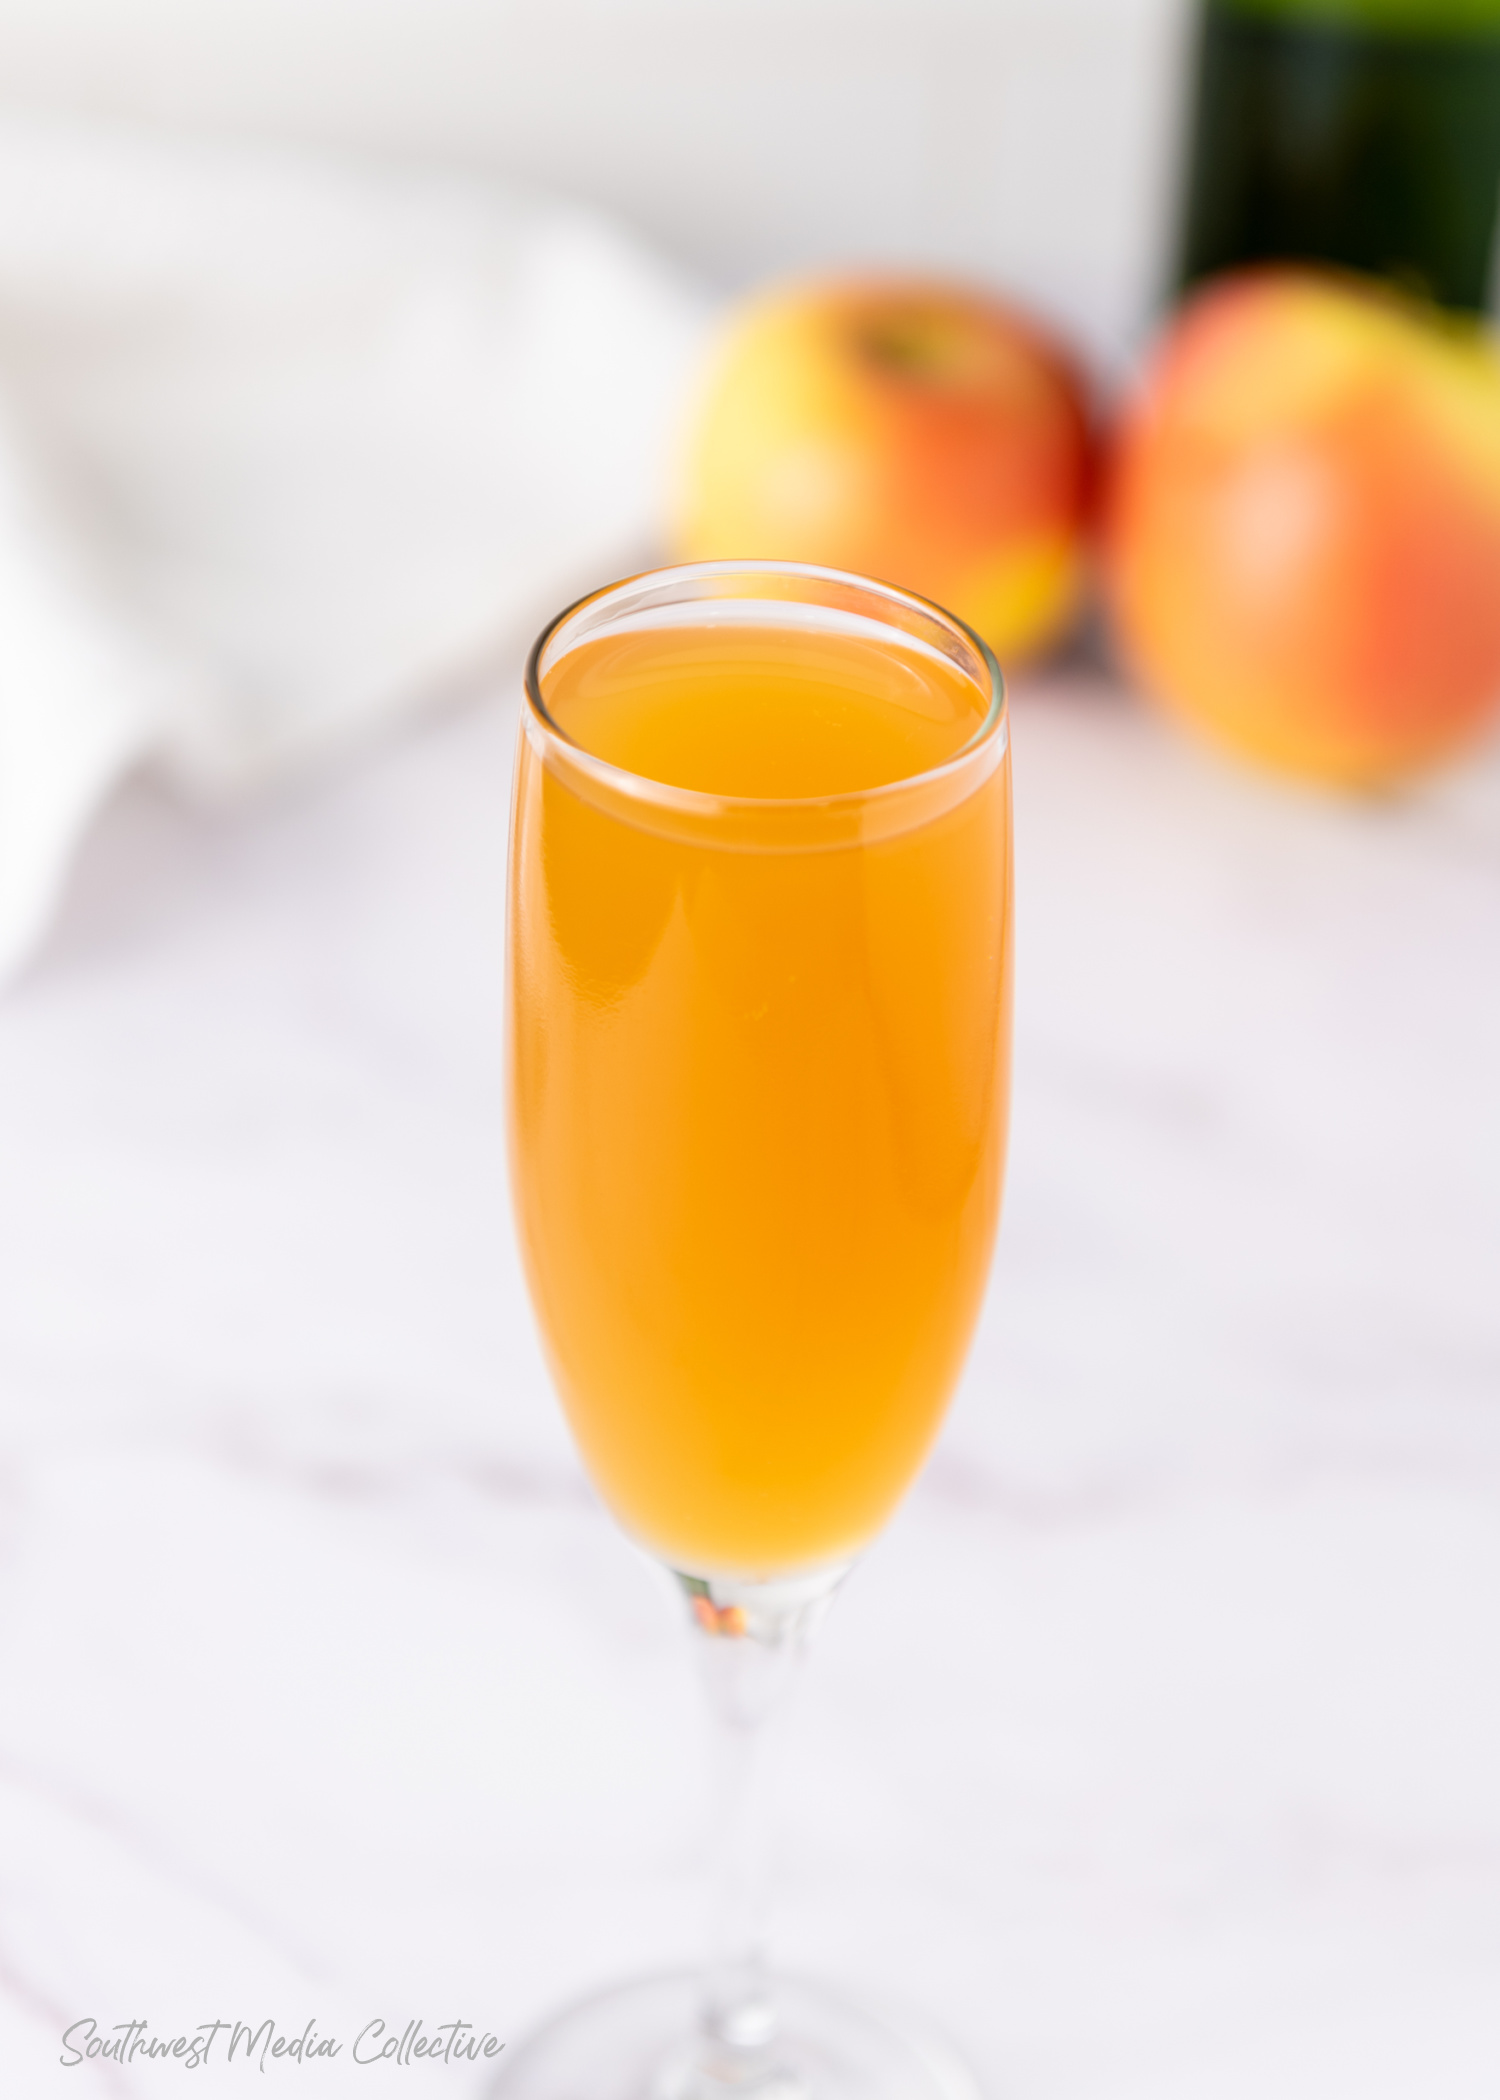 Get ready for your next holiday, birthday or get together with this easy 2-ingredient Apple Cider Mimosa!  It is the perfect way to relax after a long day or celebrate family and friends!